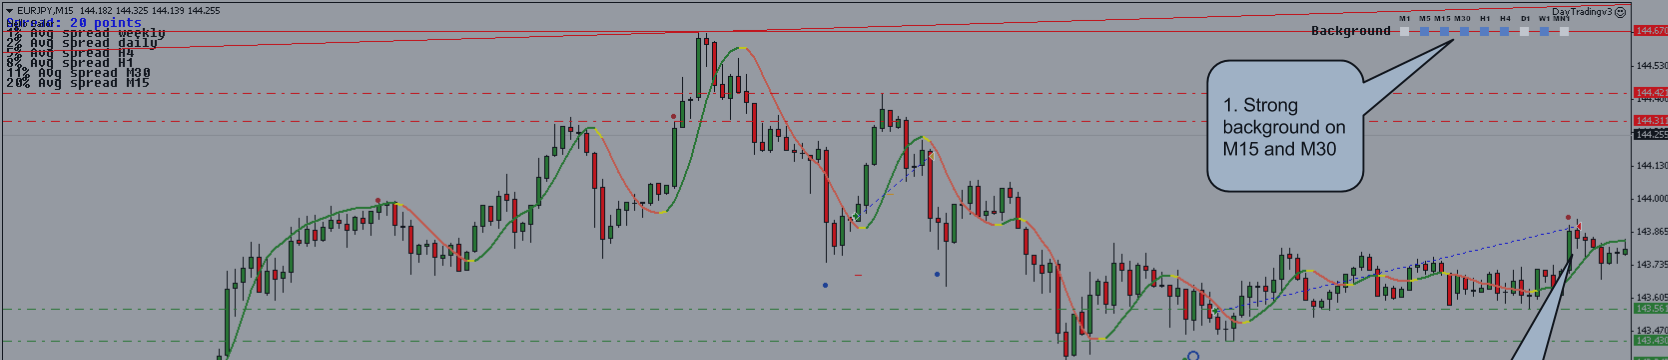 EURJPY - Riding the M15